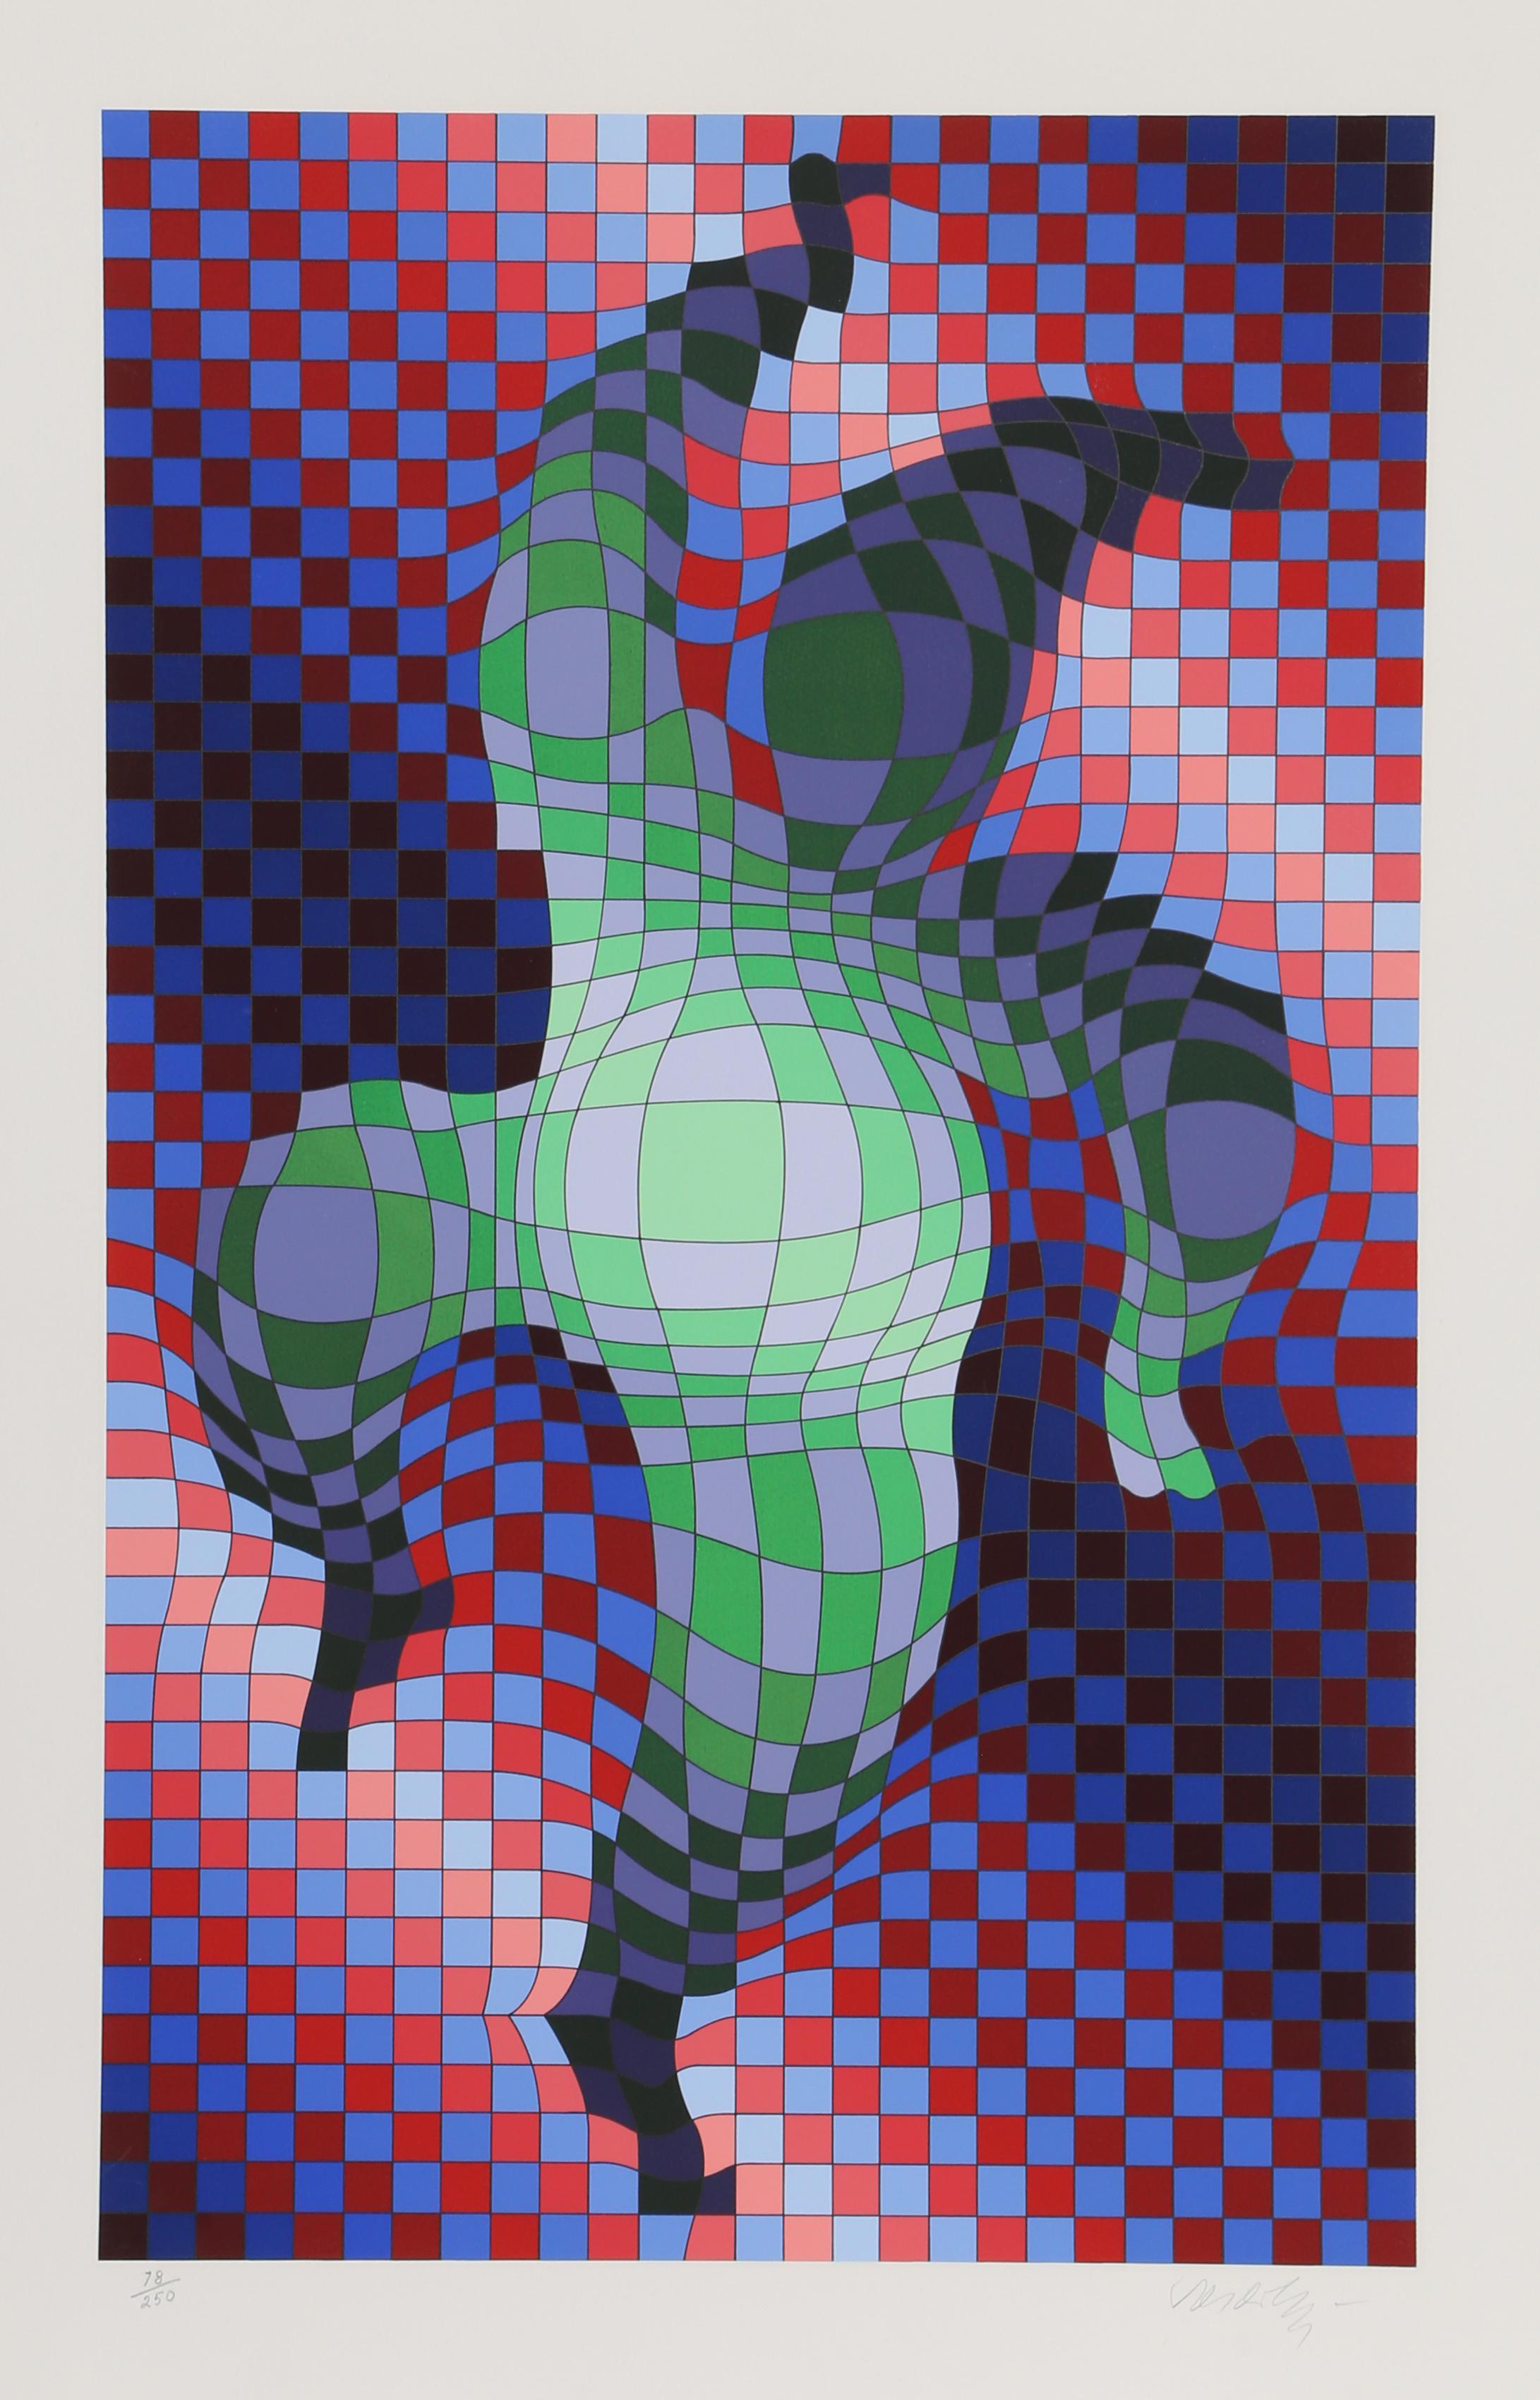 Harlequin by Victor Vasarely, Hungarian (1908–1997)
Date: circa 1980
Screenprint, signed and numbered in pencil
Edition of 78/250
Image Size: 25.75 x 16 inches
Size: 30.5 x 19.75 in. (77.47 x 50.17 cm)